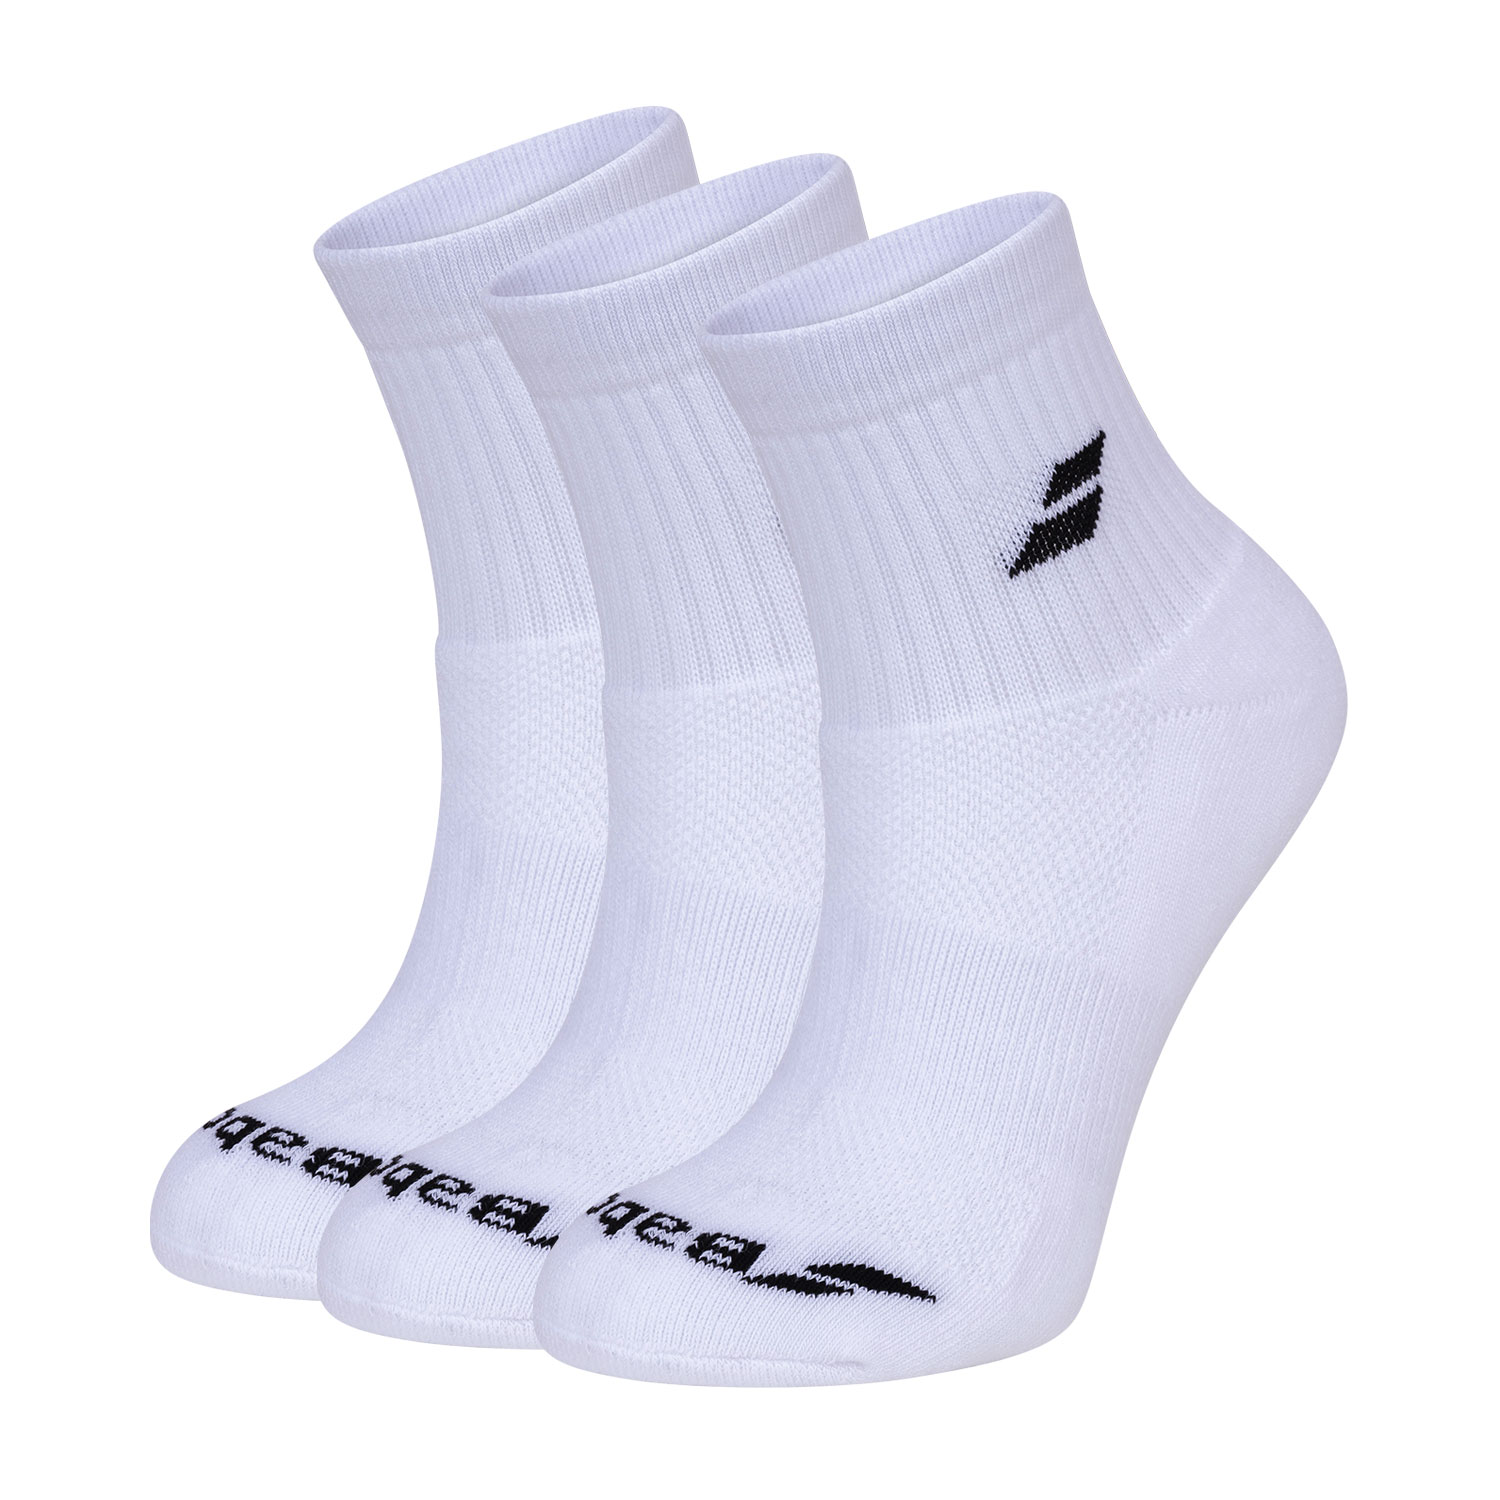 Babolat Performance x 3 Calcetines - White